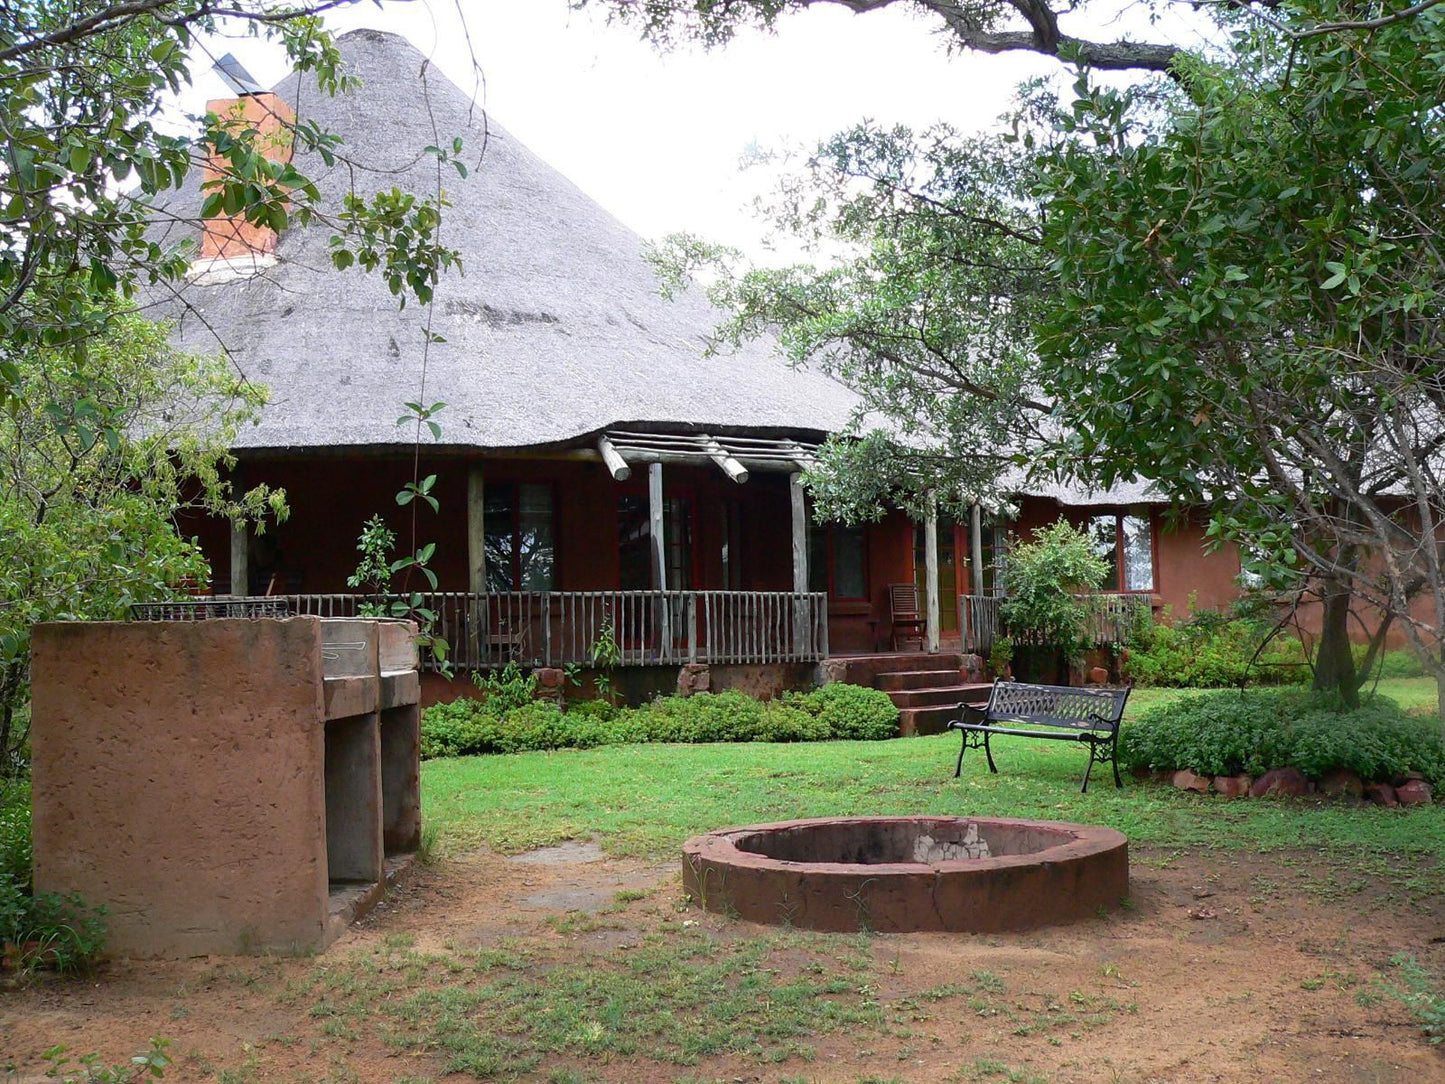 Izintaba Private Game Reserve Vaalwater Limpopo Province South Africa Building, Architecture, House